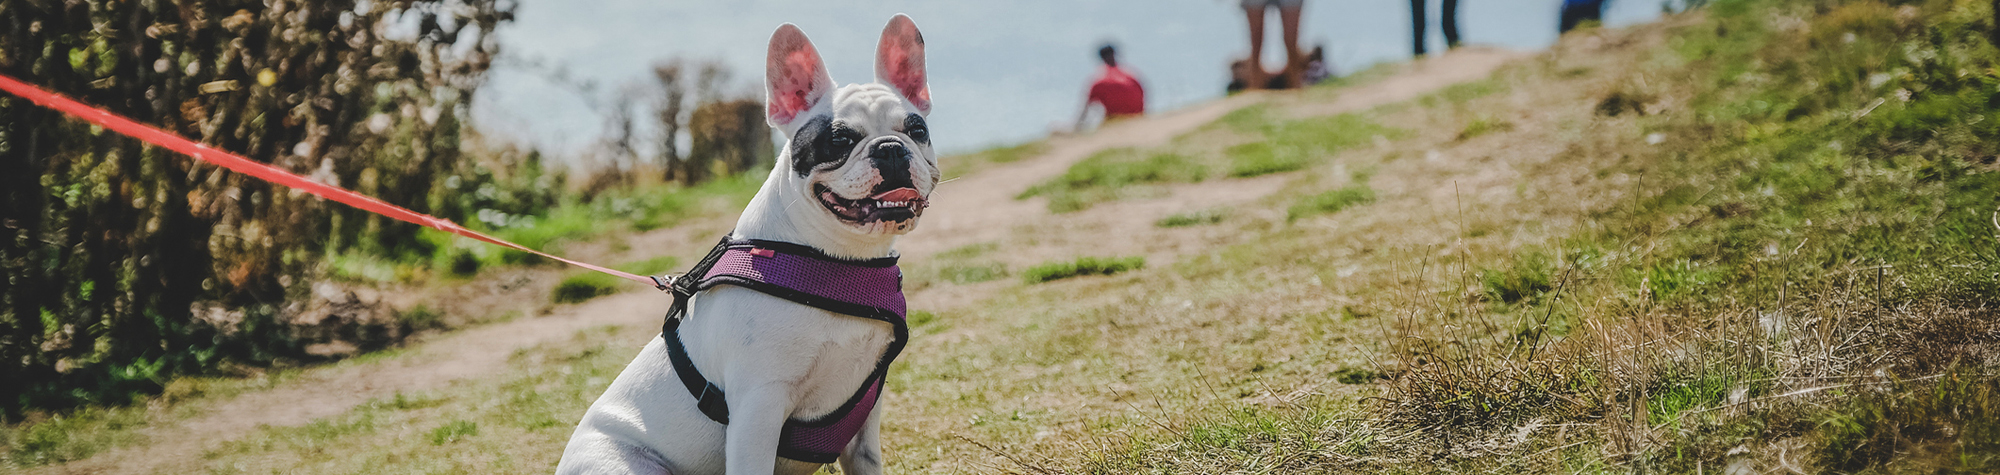 The ultimate dog-friendly destination